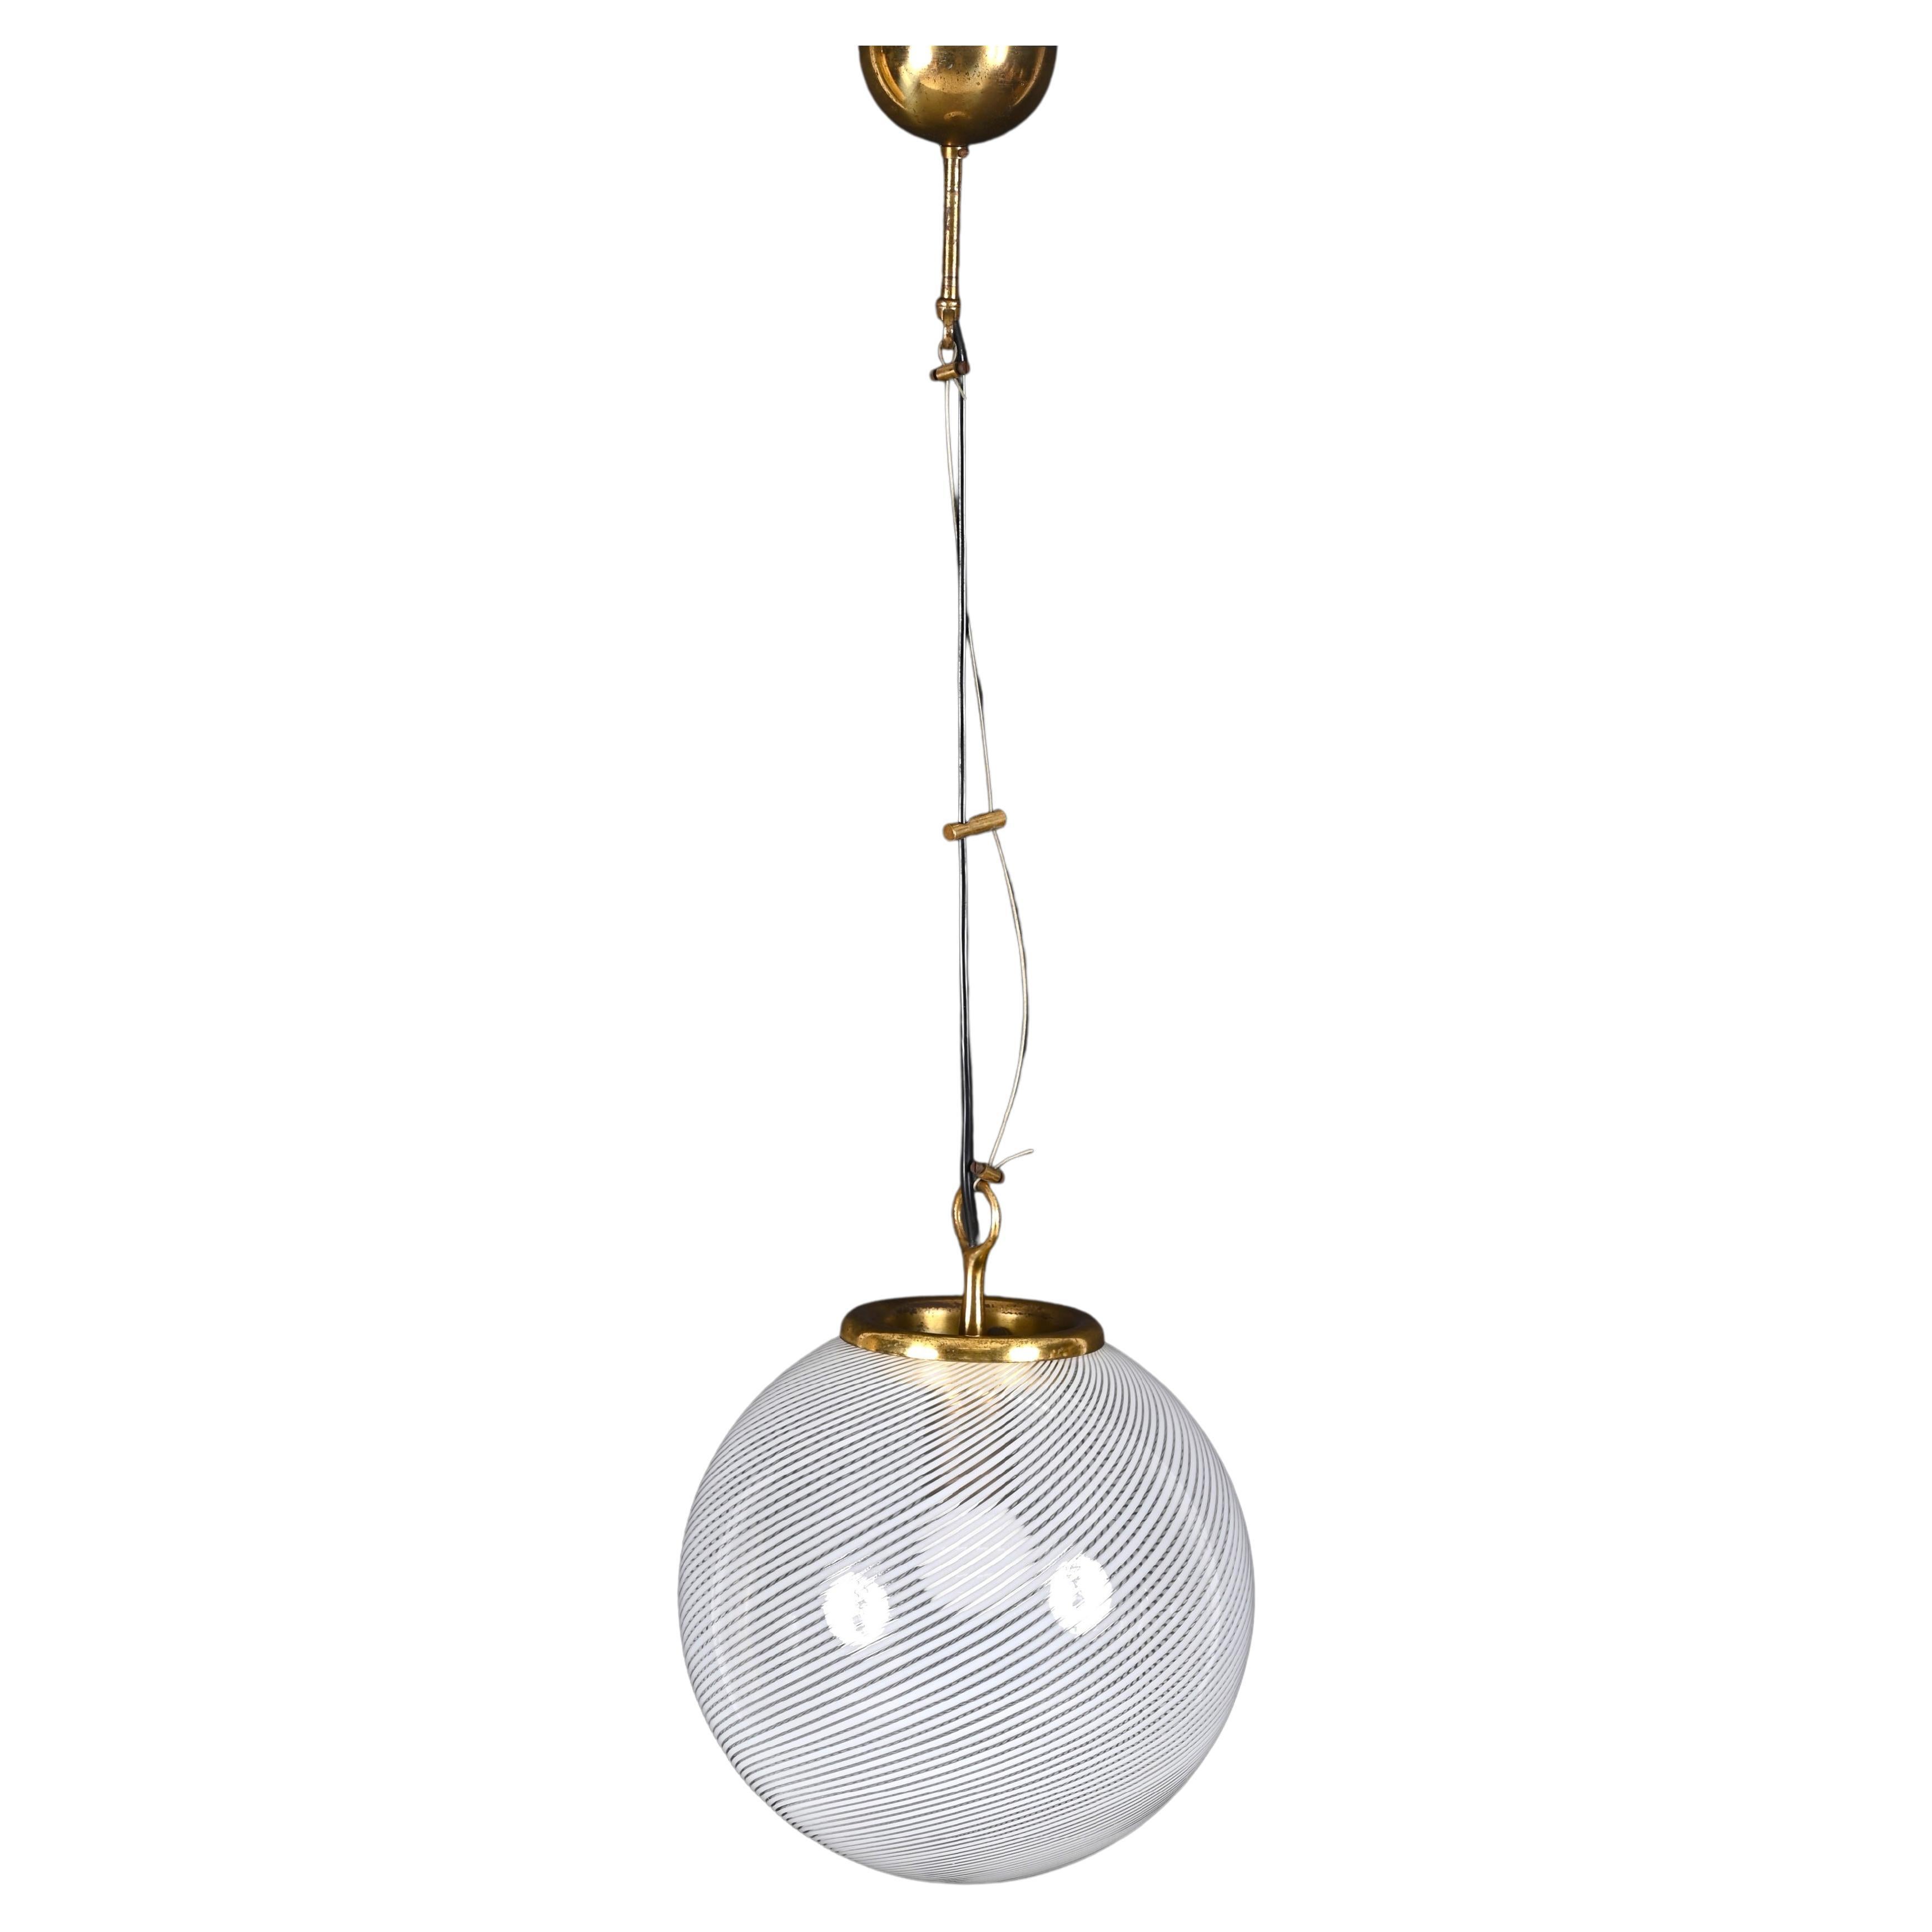 Venini Midcentury "Tessuto" White and Crystal Murano Glass Chandelier, 1970s For Sale